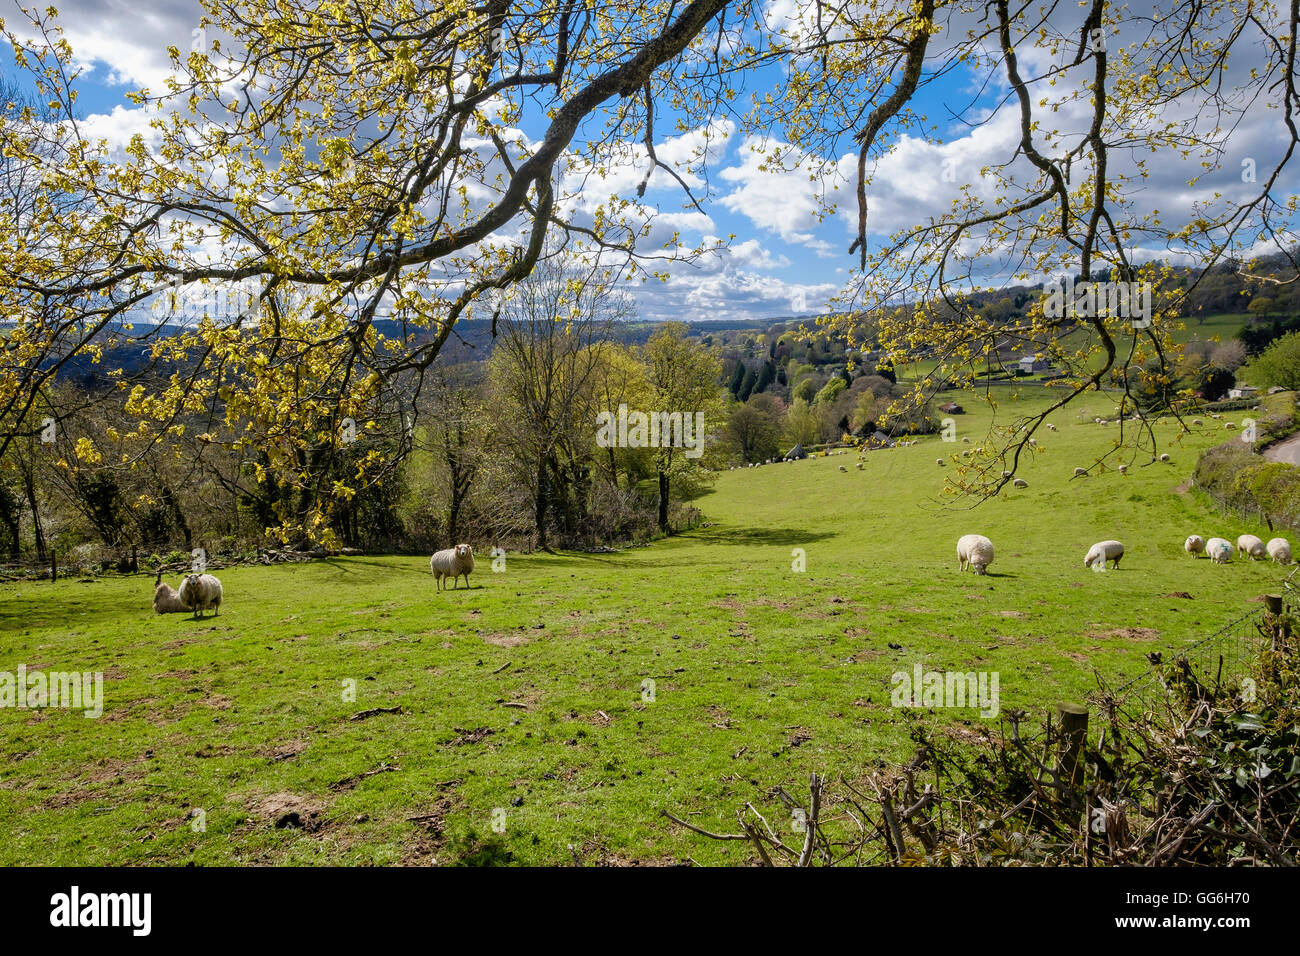 Hewelsfield near Brockweir in Wye Valley in spring. Engalnd UK. Trees in early leaf and sheep in field with blue sky and clouds. Stock Photo